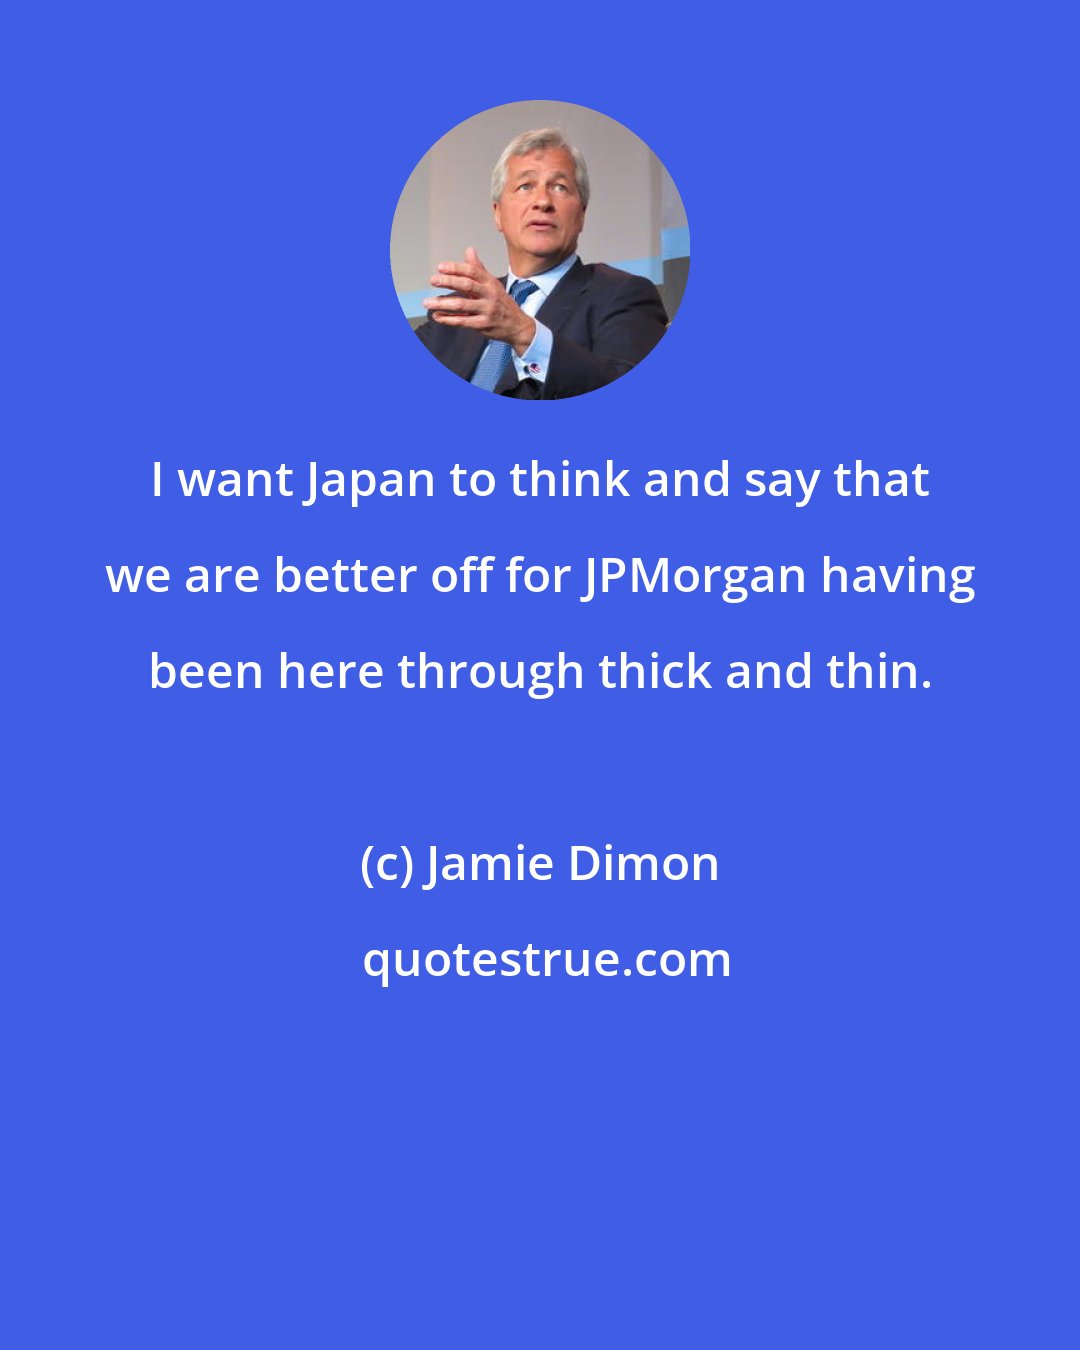 Jamie Dimon: I want Japan to think and say that we are better off for JPMorgan having been here through thick and thin.